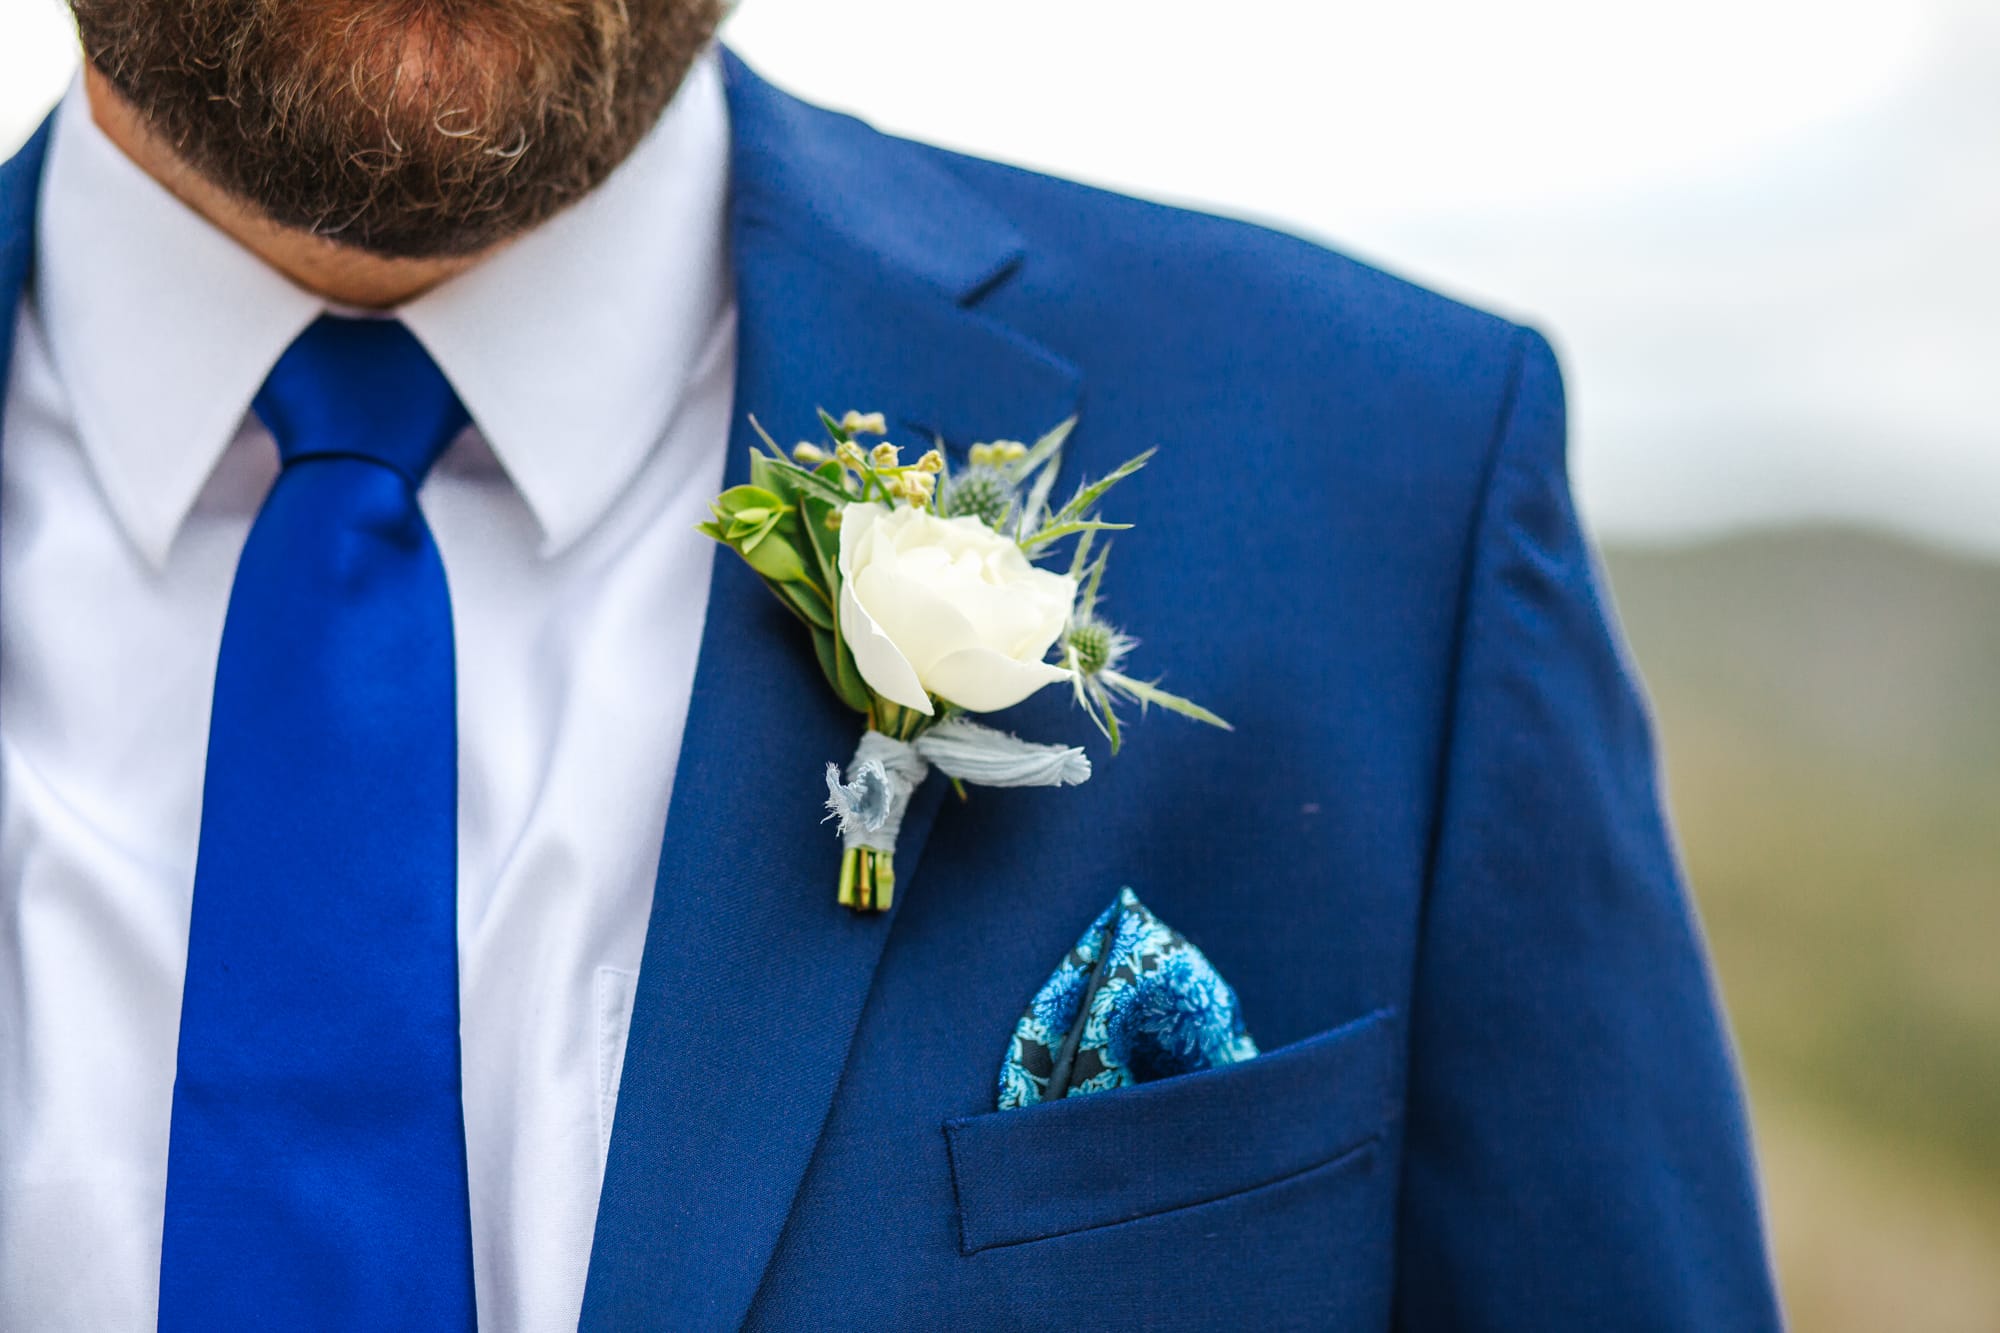 sapphire point, sapphire point wedding, blue suit groom, blue pocket square, colorful wedding photographer, colorful colorado wedding, intimate wedding, intimate wedding photographer, groom details, white groom flowers